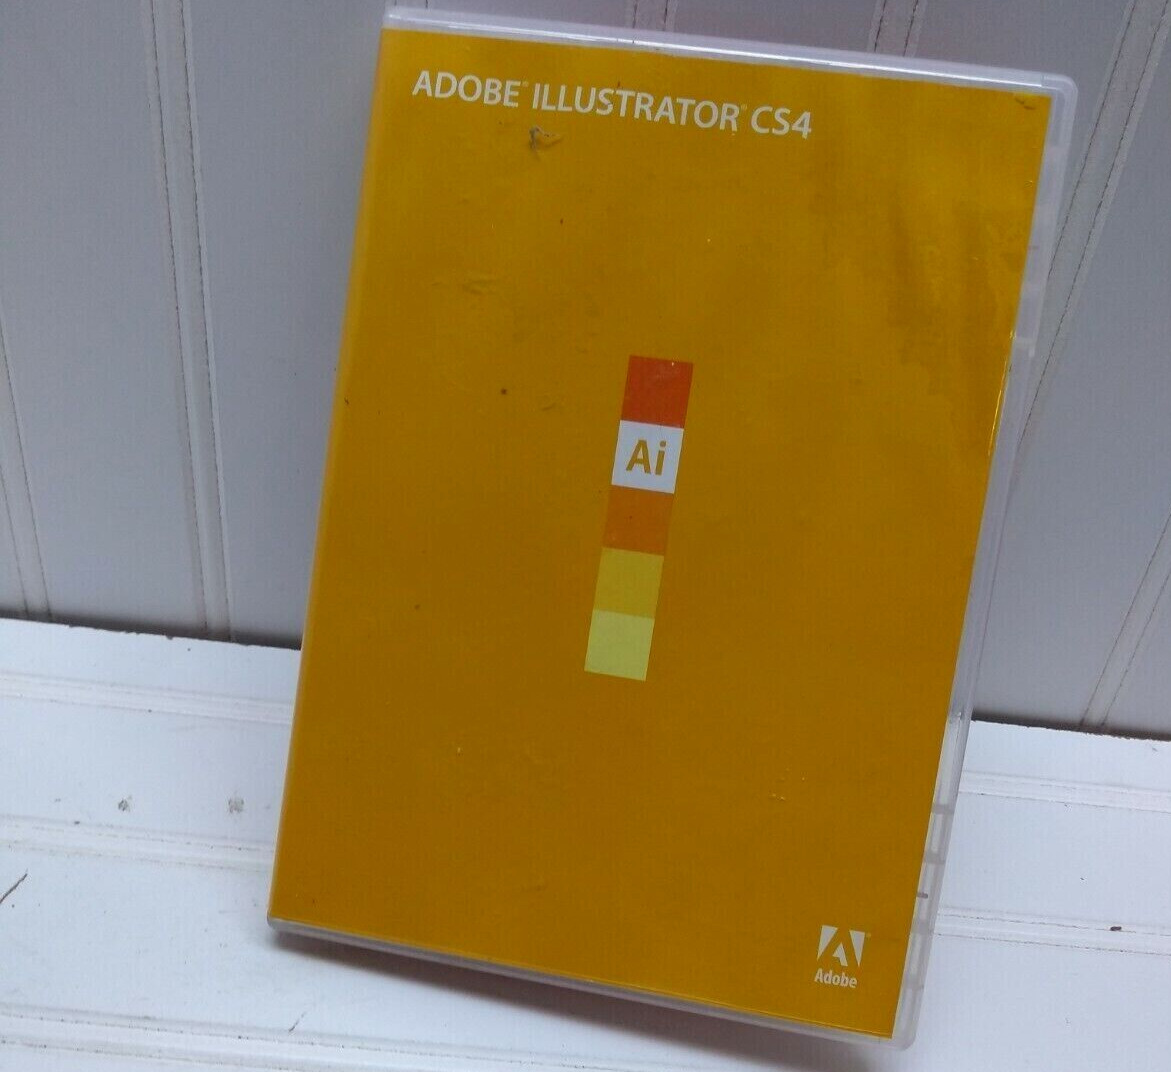 Adobe Creative Suite 4 Illustrator CS4 for MAC OS 1 DVD Disc ONLY